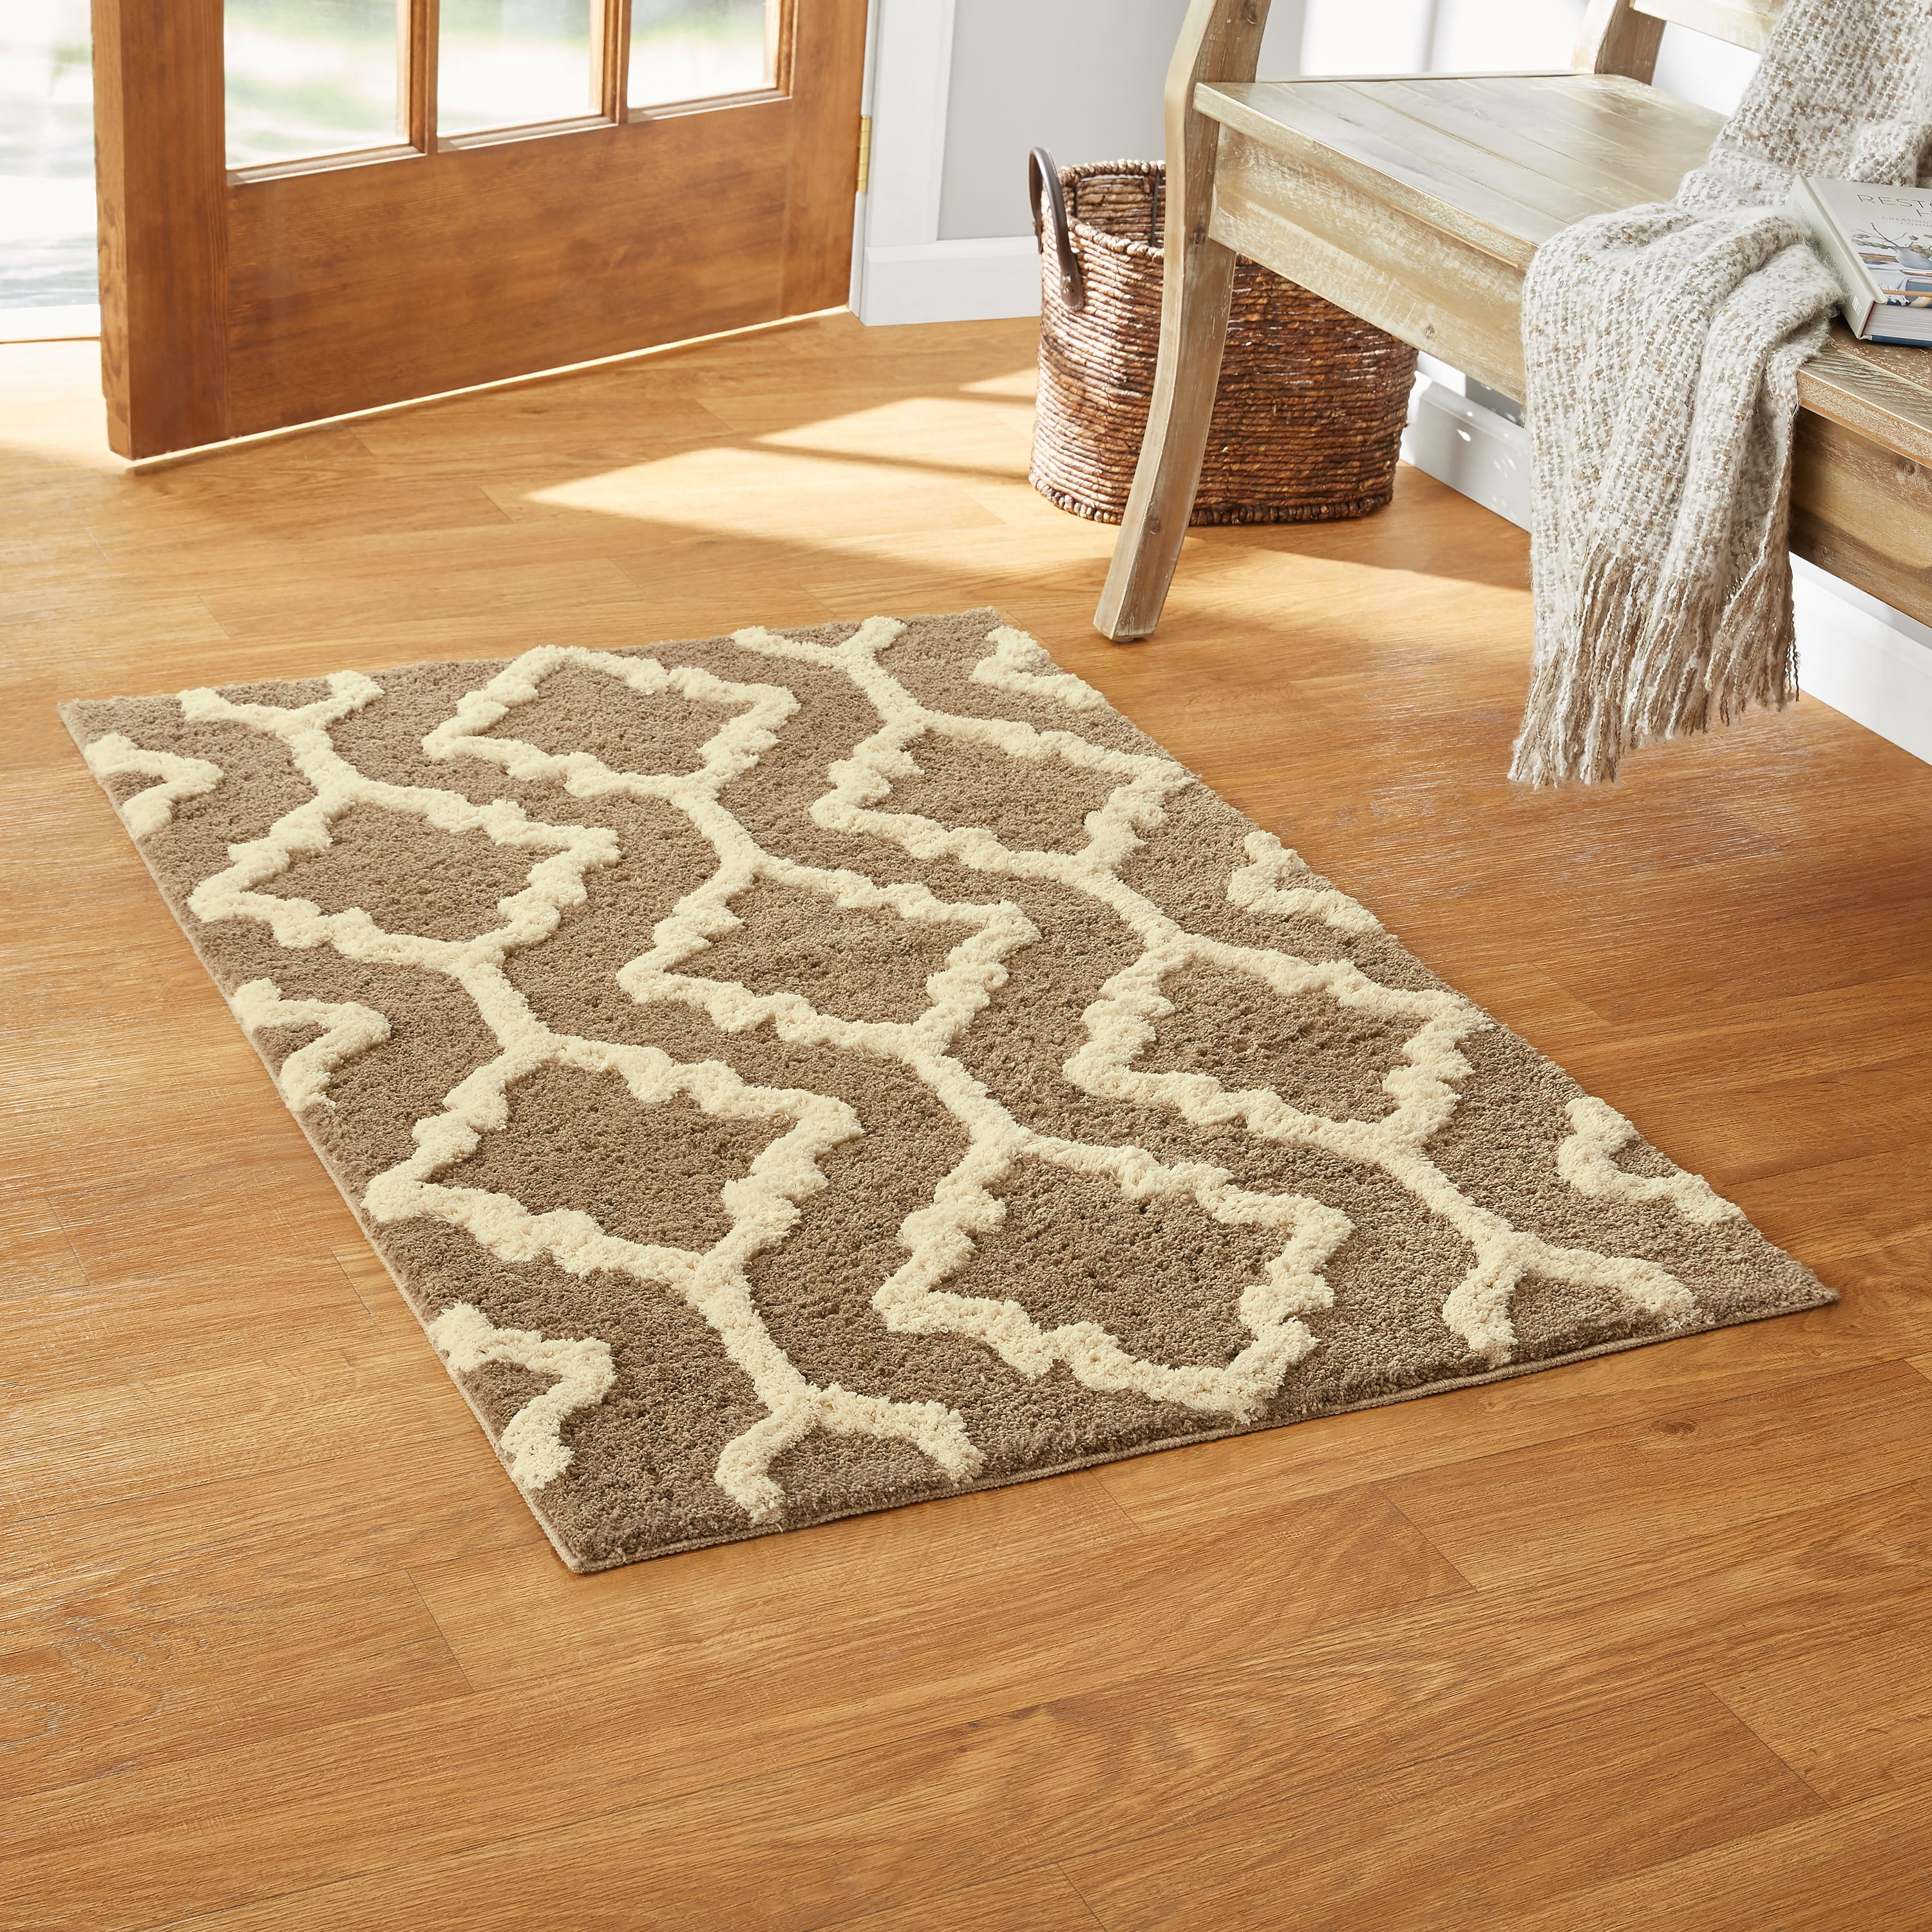 Taupe Geo Polyester Rug, Better Homes And Gardens Geo Waves Textured Print Area Rugs 8×10